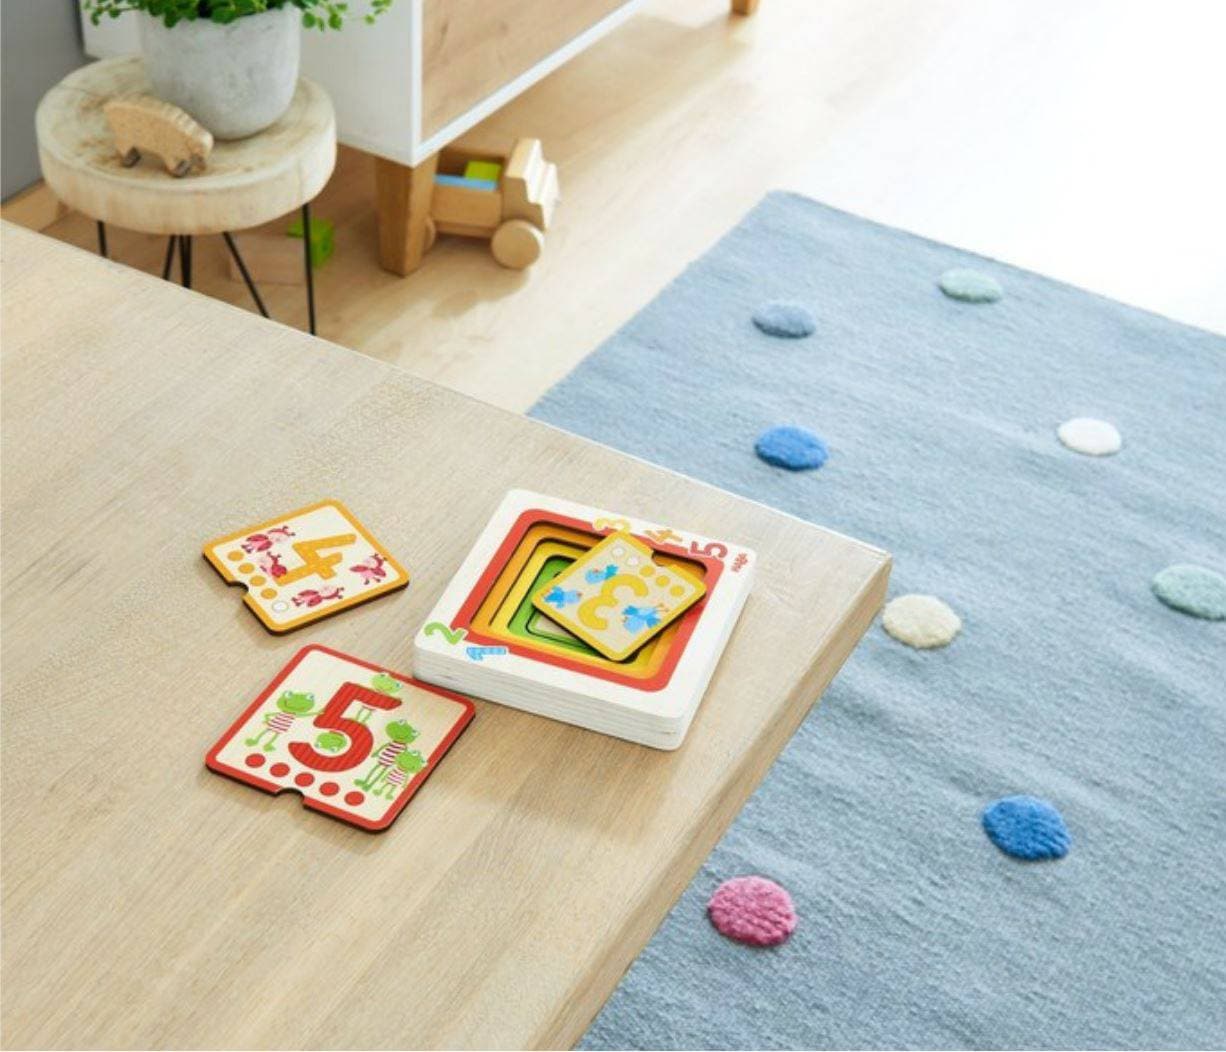 Counting Friends Wood Layering Puzzle 1 to 5 - HABA USA